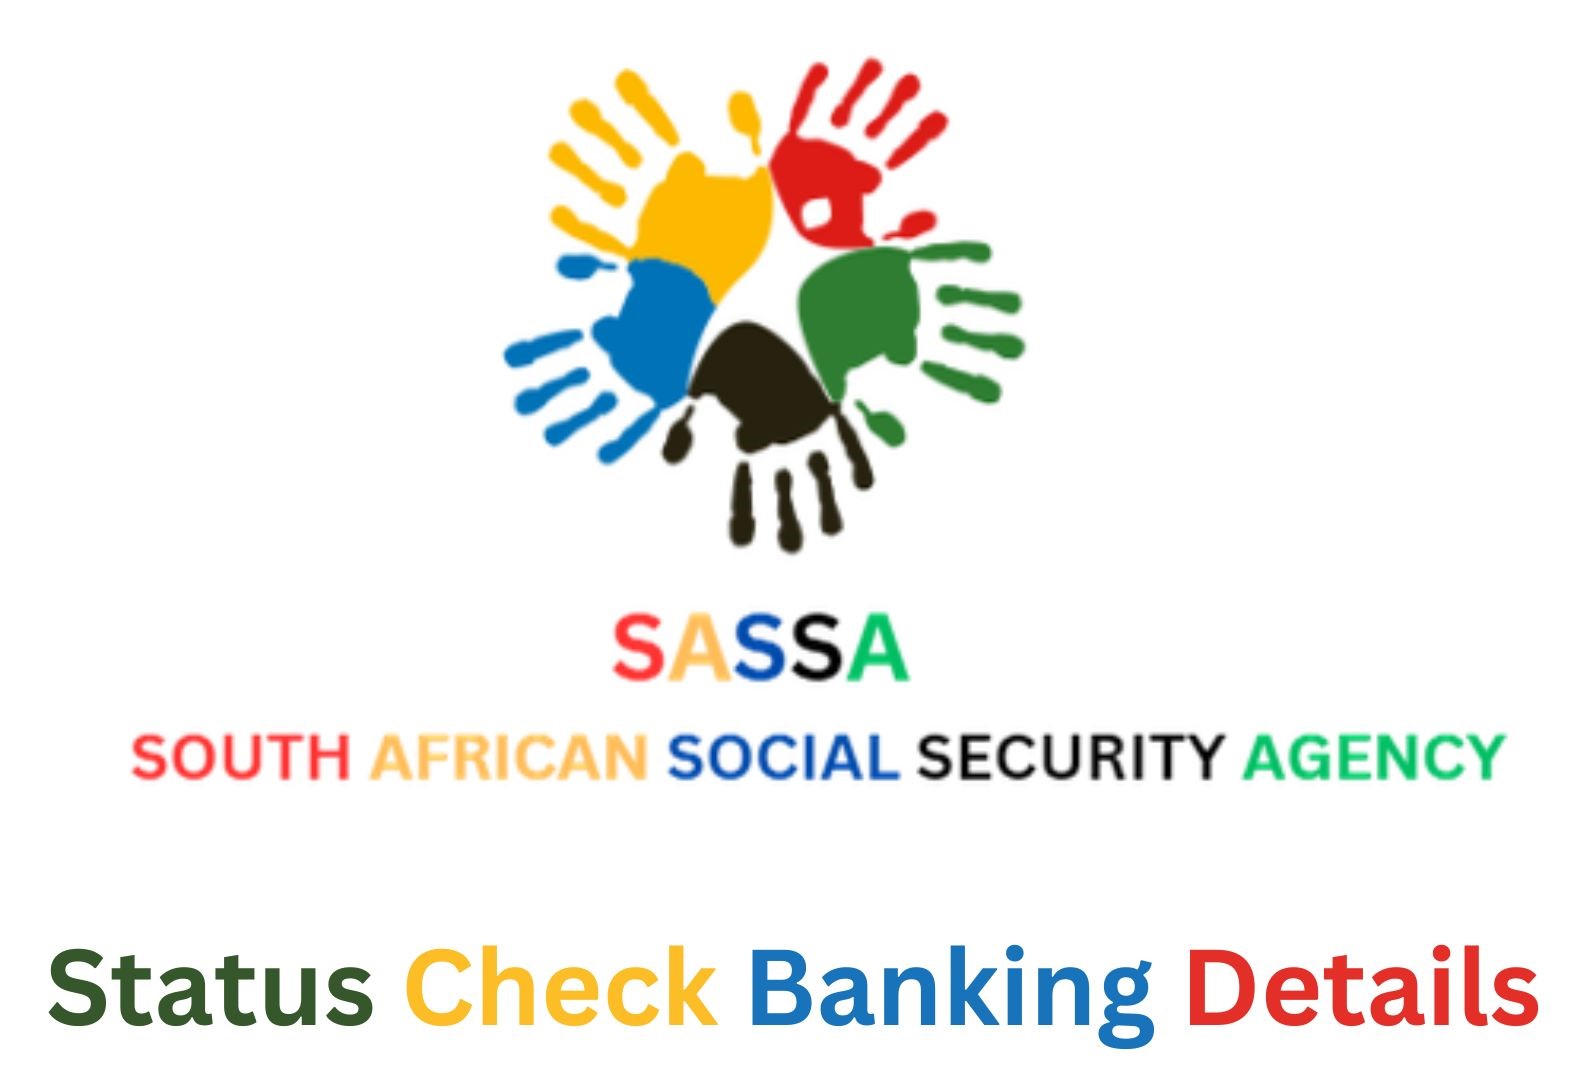 SASSA Status Check Banking Details: How To Check Or Change